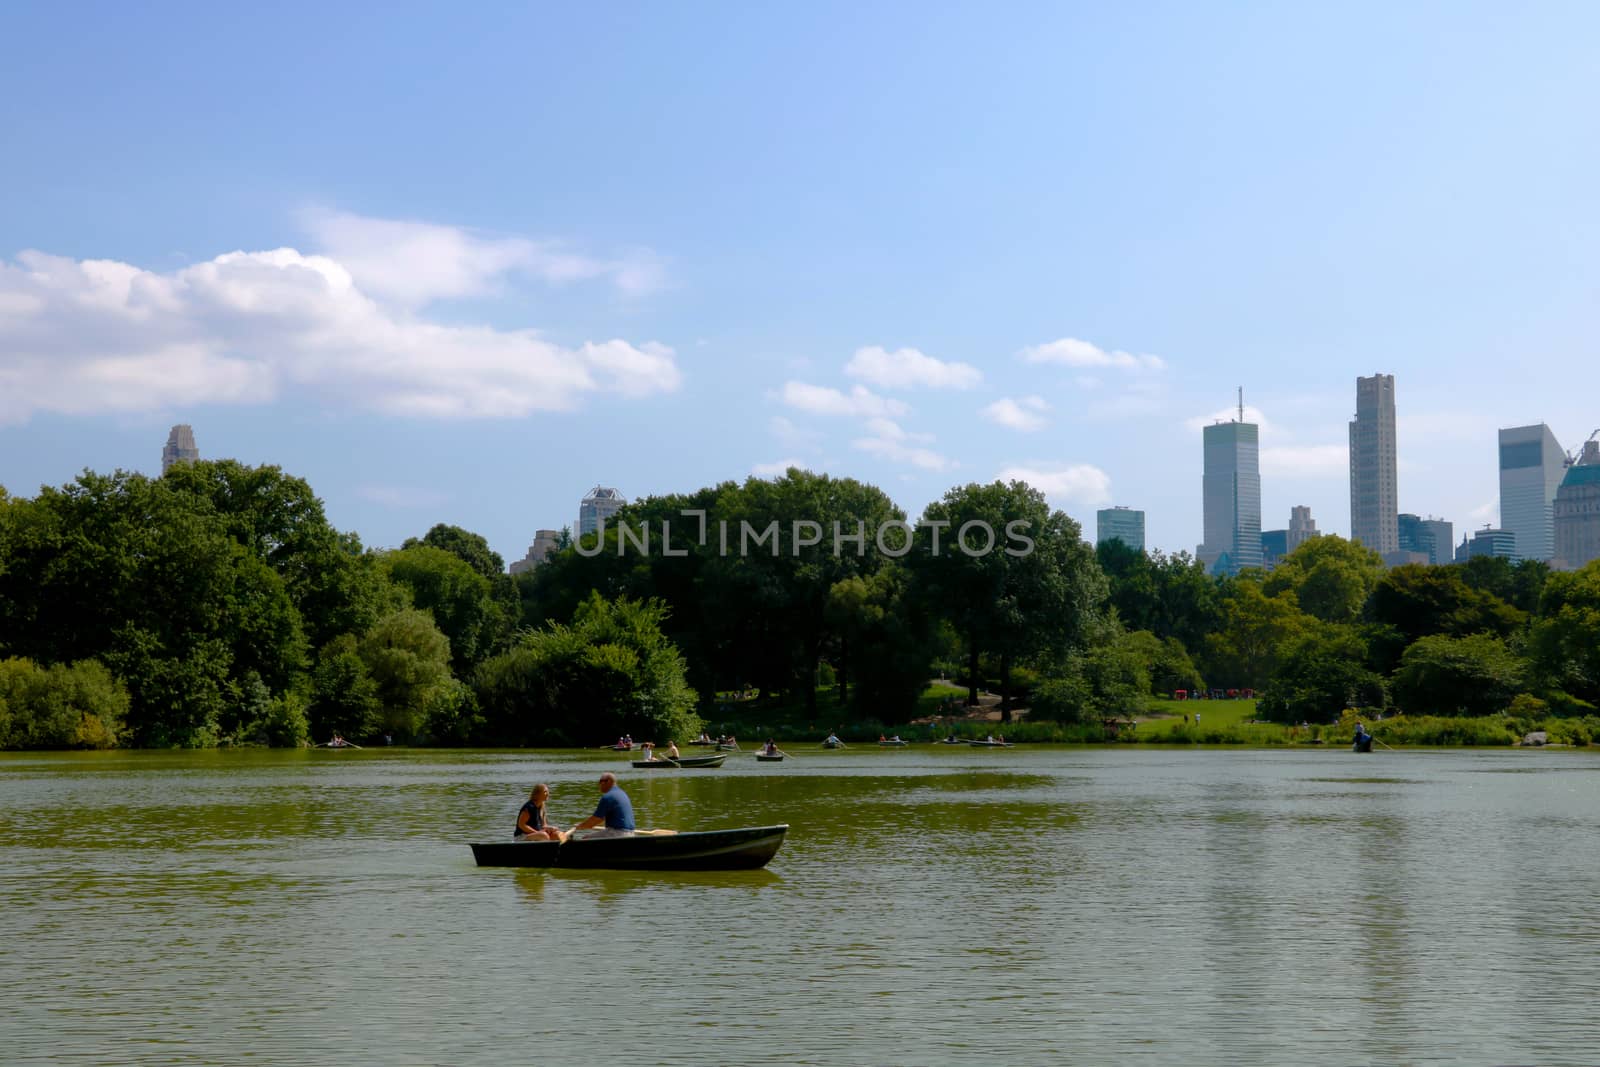 NEW YORK, USA - August 30, 2018: boat on the canal in Central Park, New York City, USA. by kip02kas